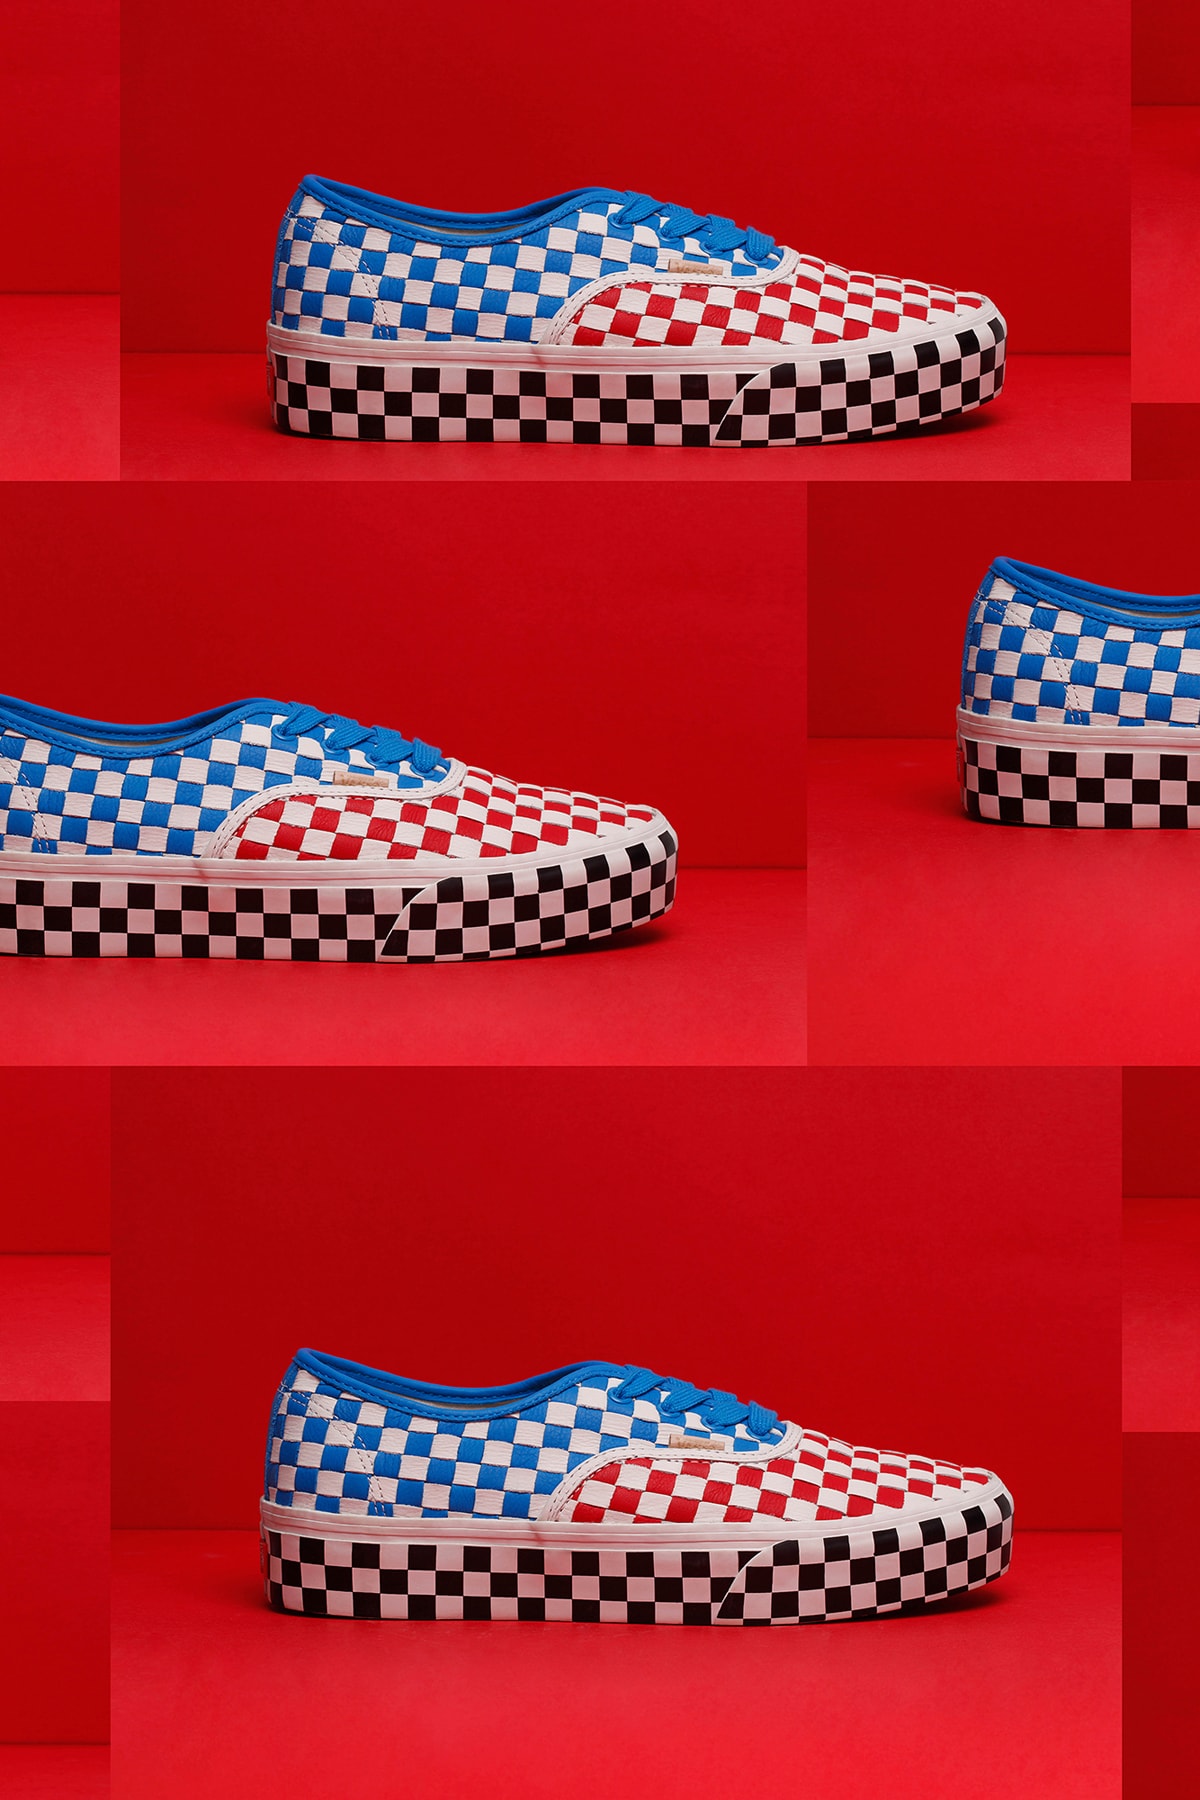 Vans by Kiroic 2017 "Year of the Rooster" Lookbook